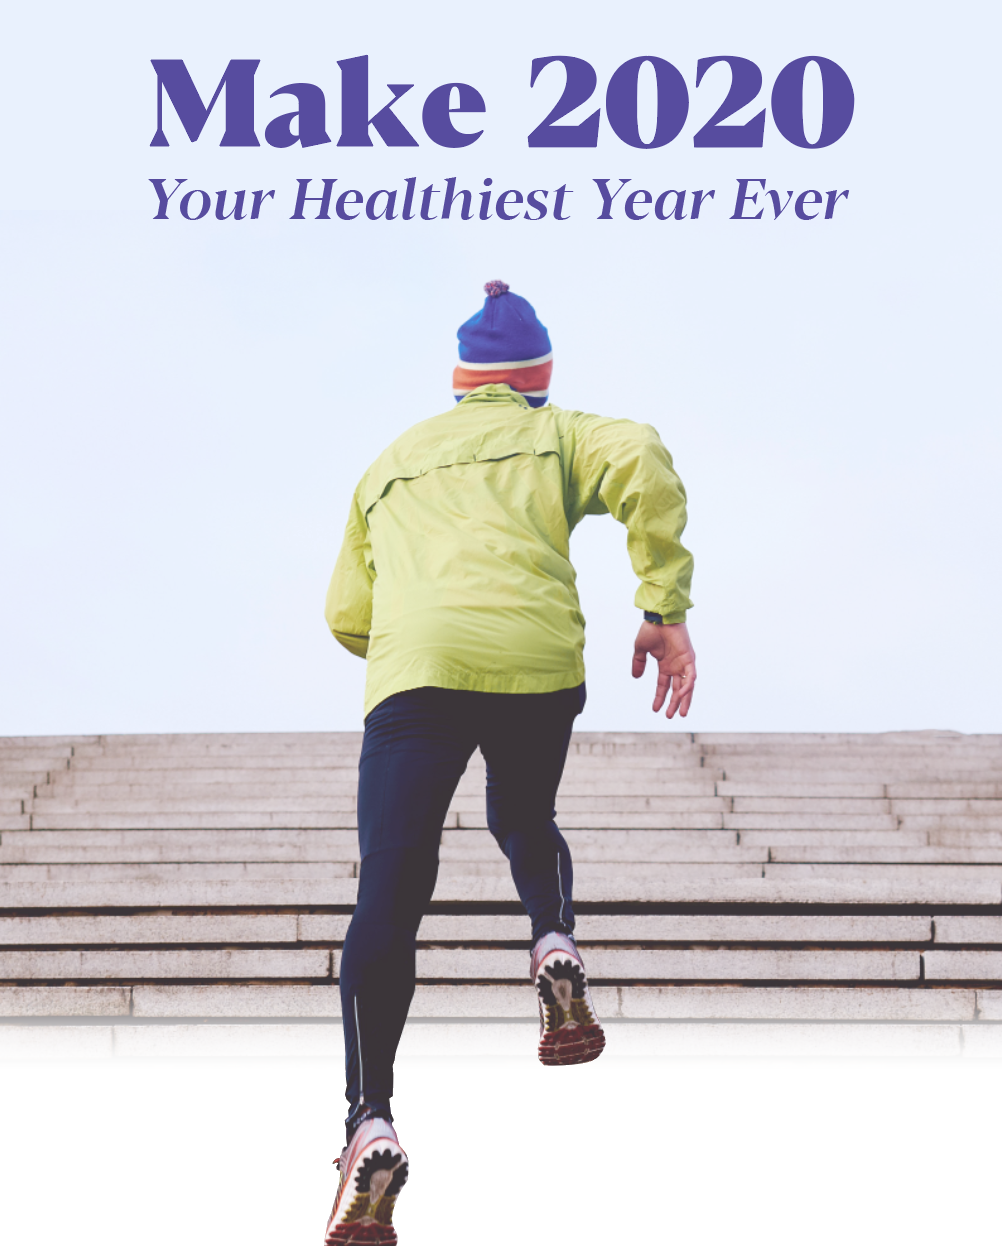 Make 2020 Your Healthiest Year Ever